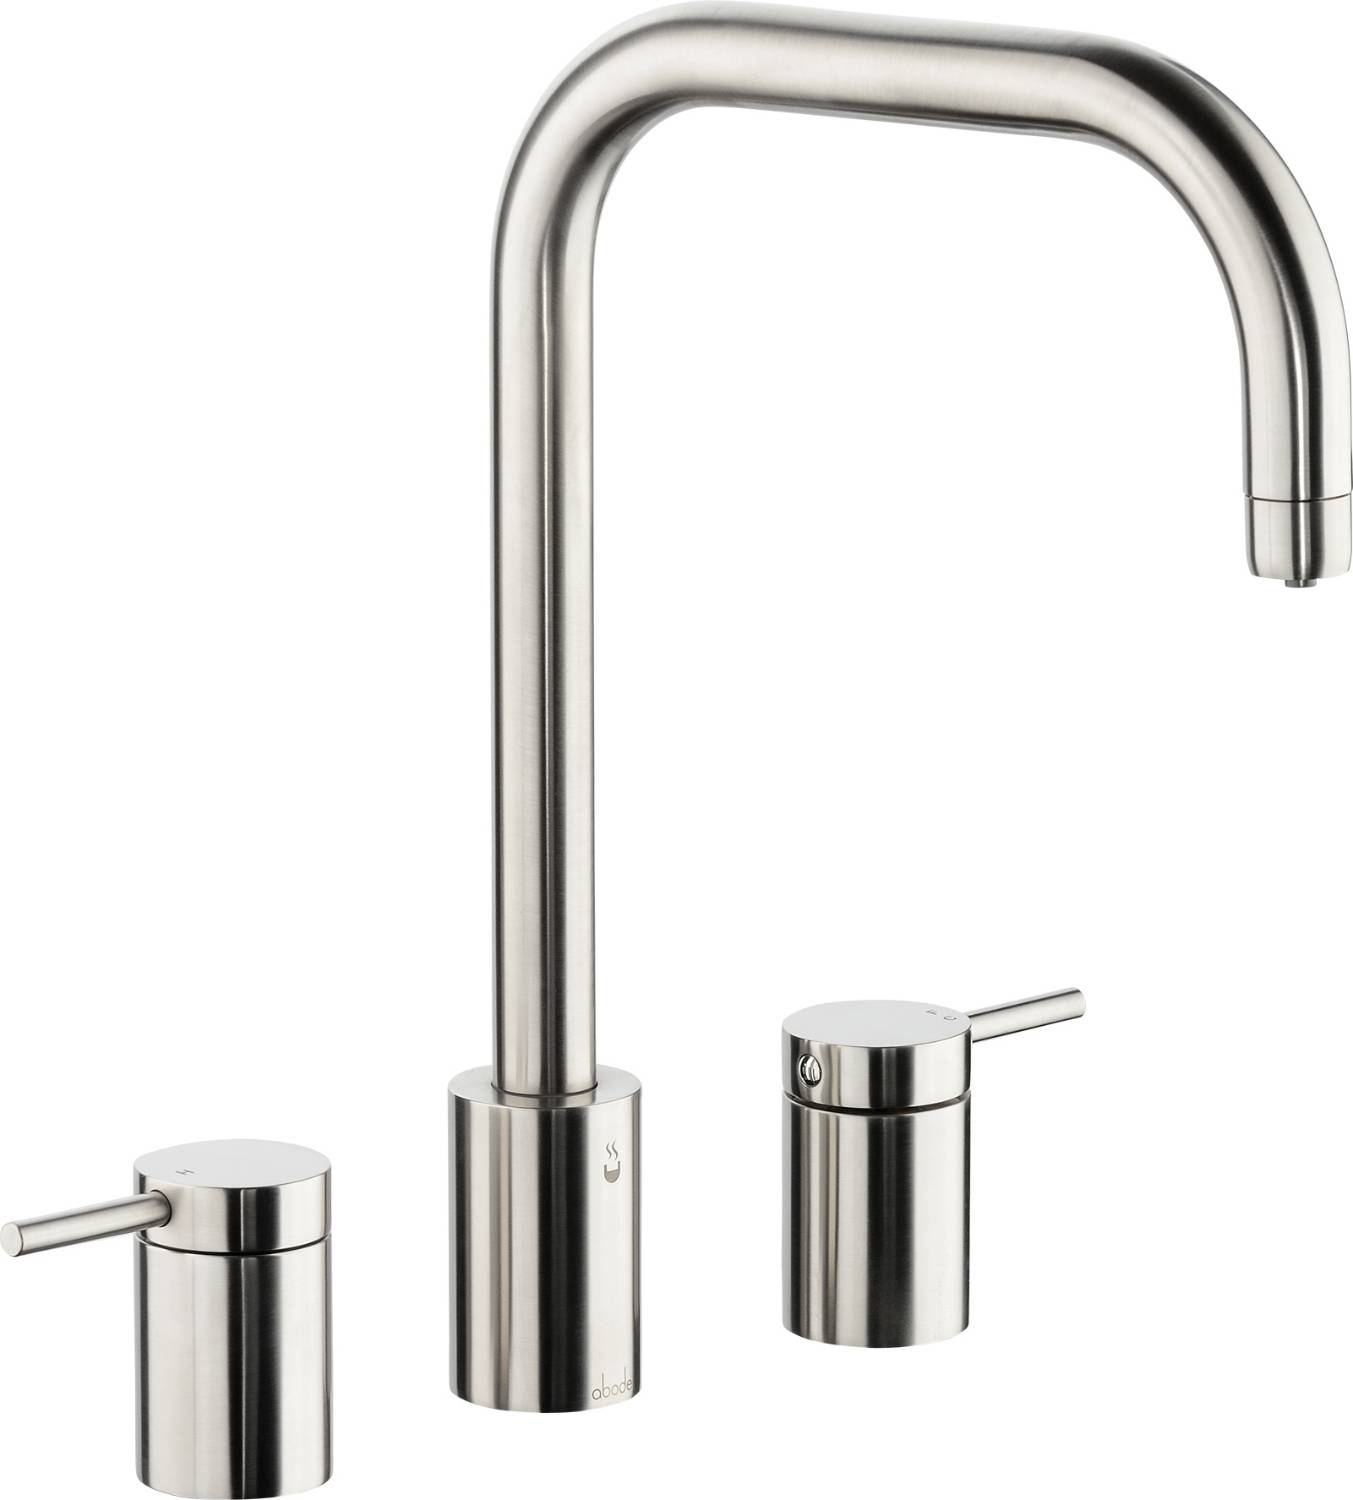 PRONTEAU™ Project 3 Part Mixer - 4 IN 1 Steaming Hot Water Tap